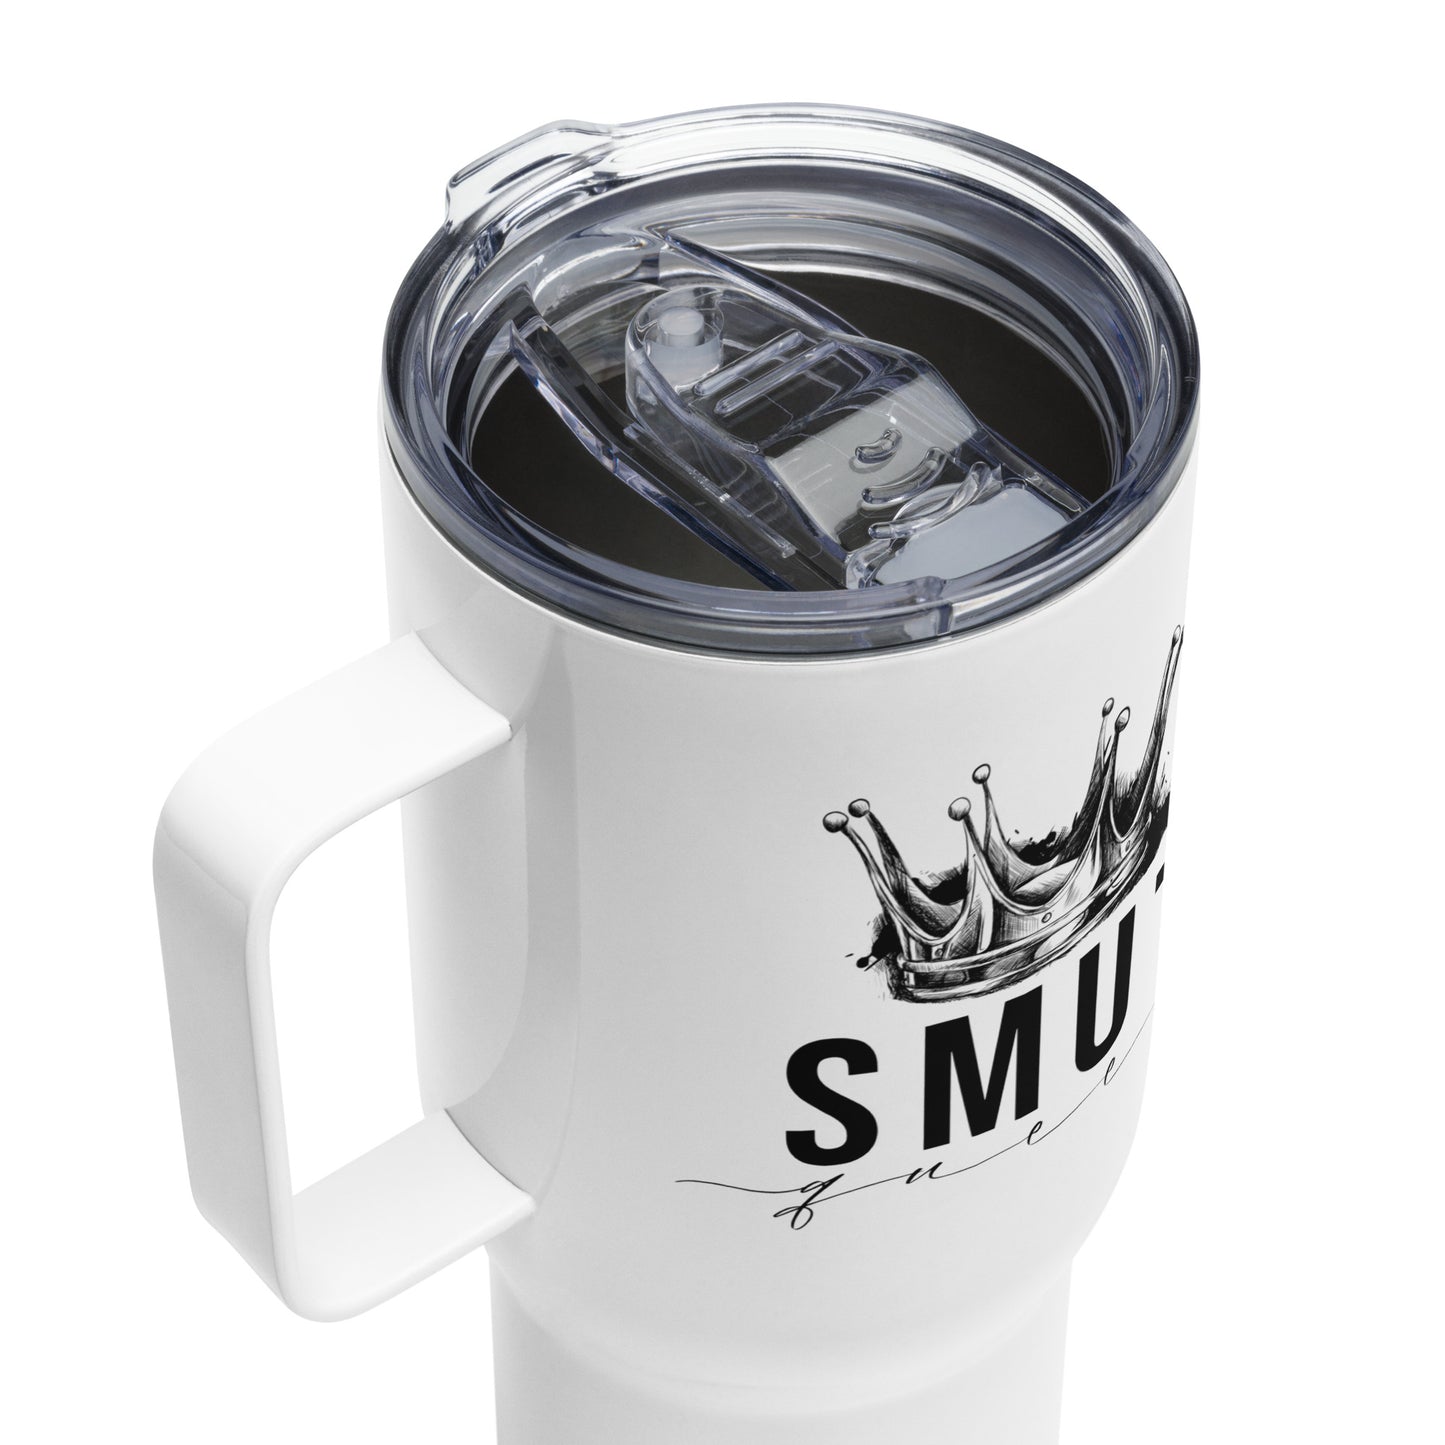 Smut Queen Travel mug with a handle